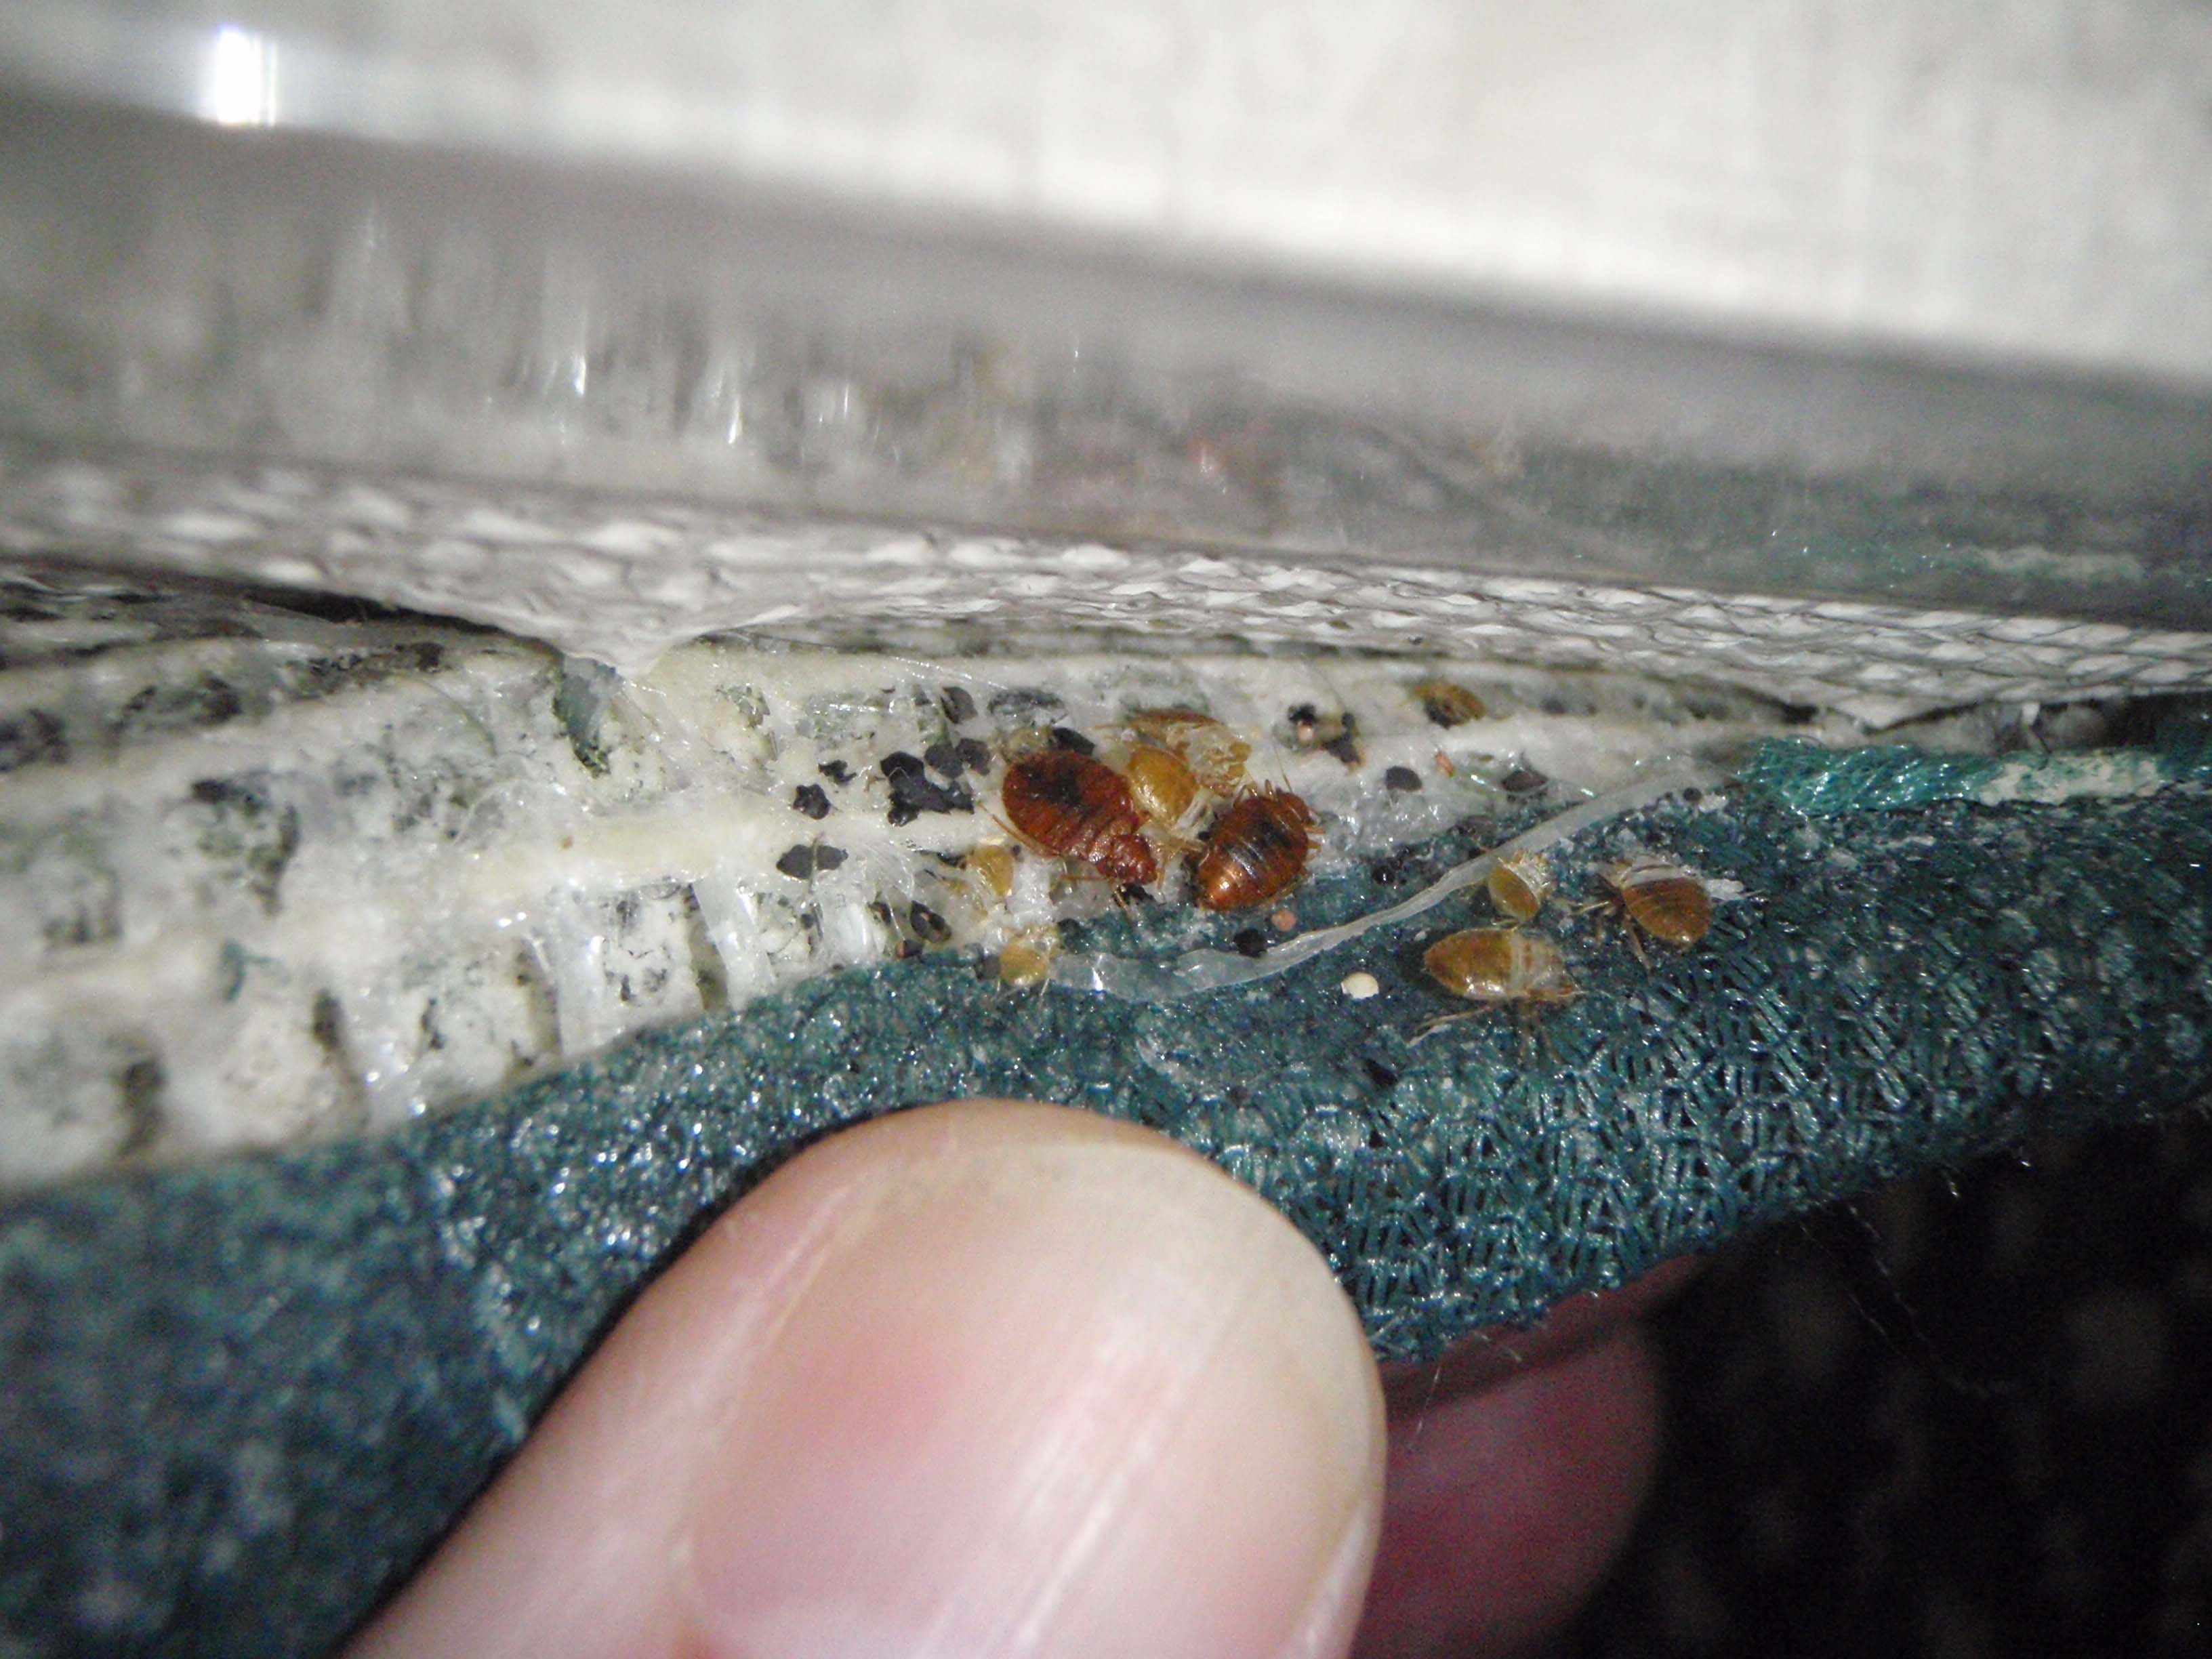 bed bugs in mattress